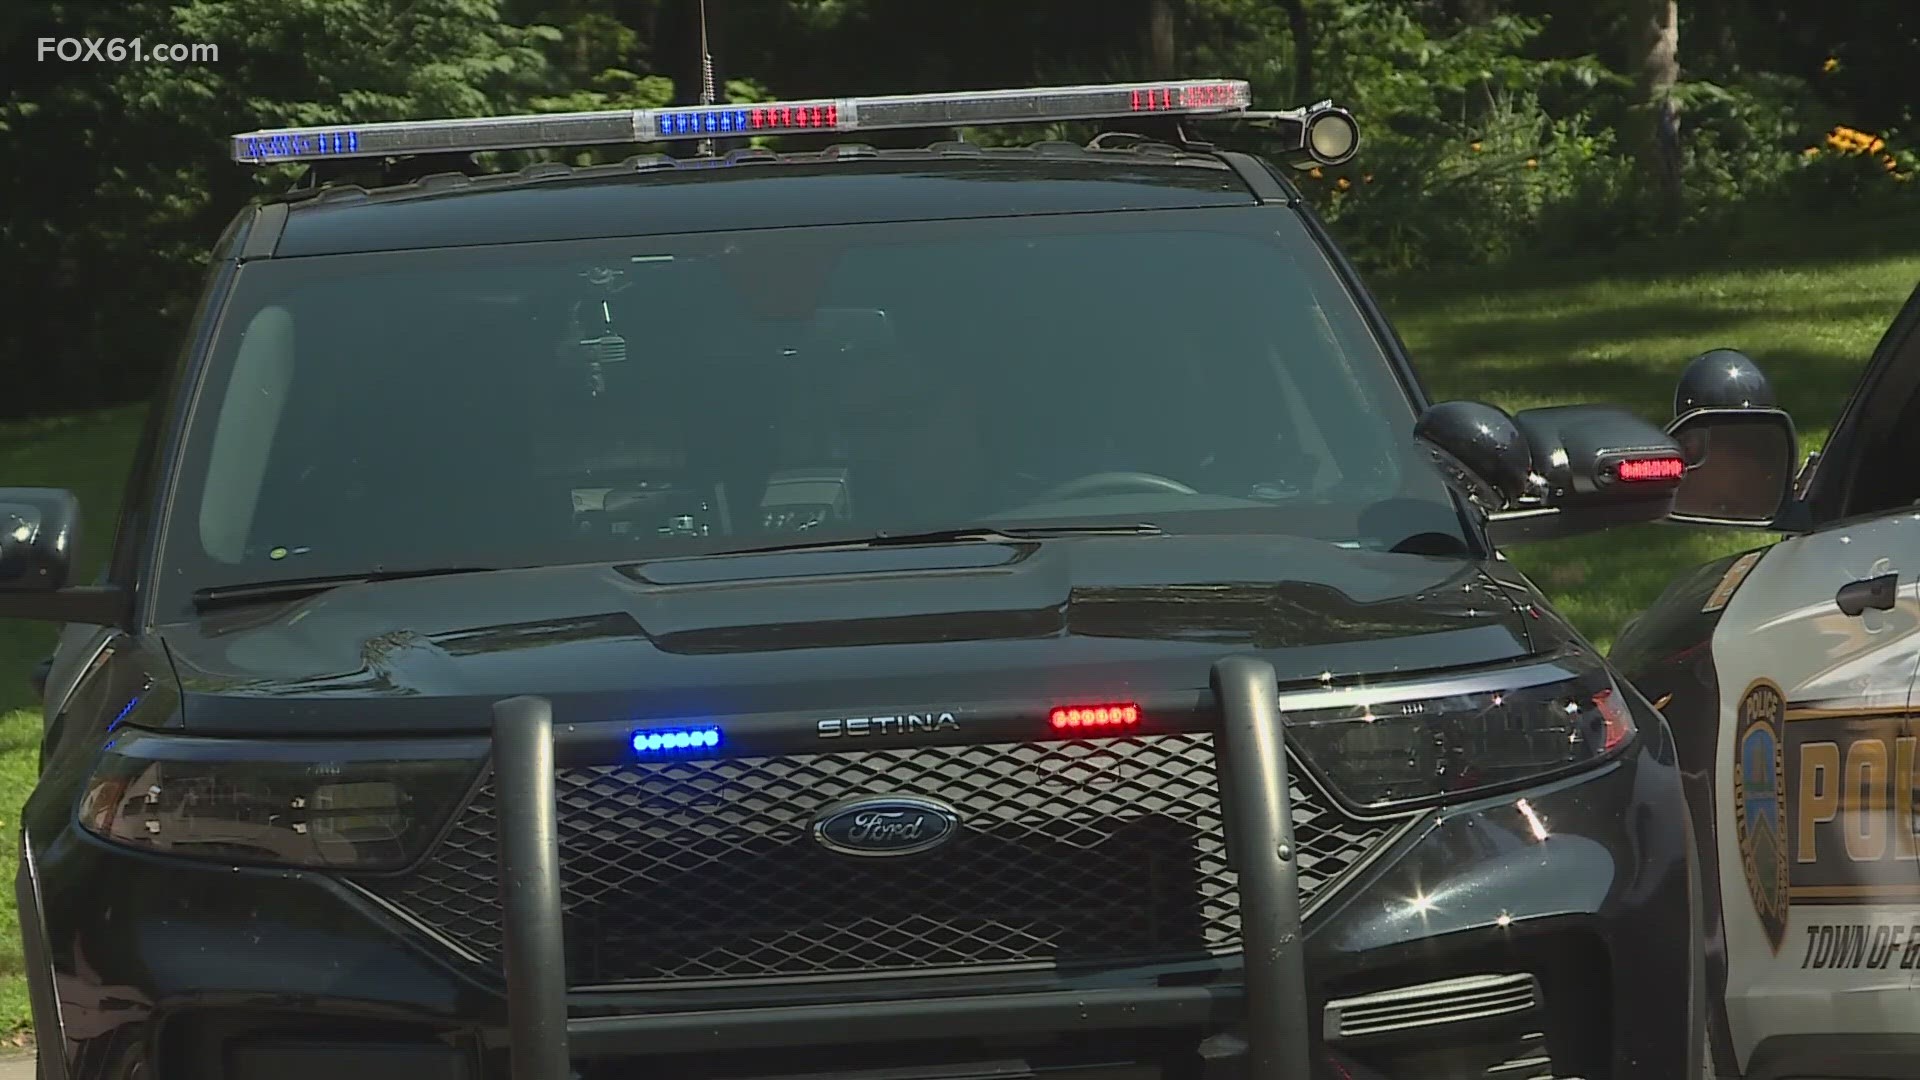 According to a report from 2020 to 2022, several Connecticut town officers were more likely to pill over Black and Hispanic drivers than White drivers in the day.